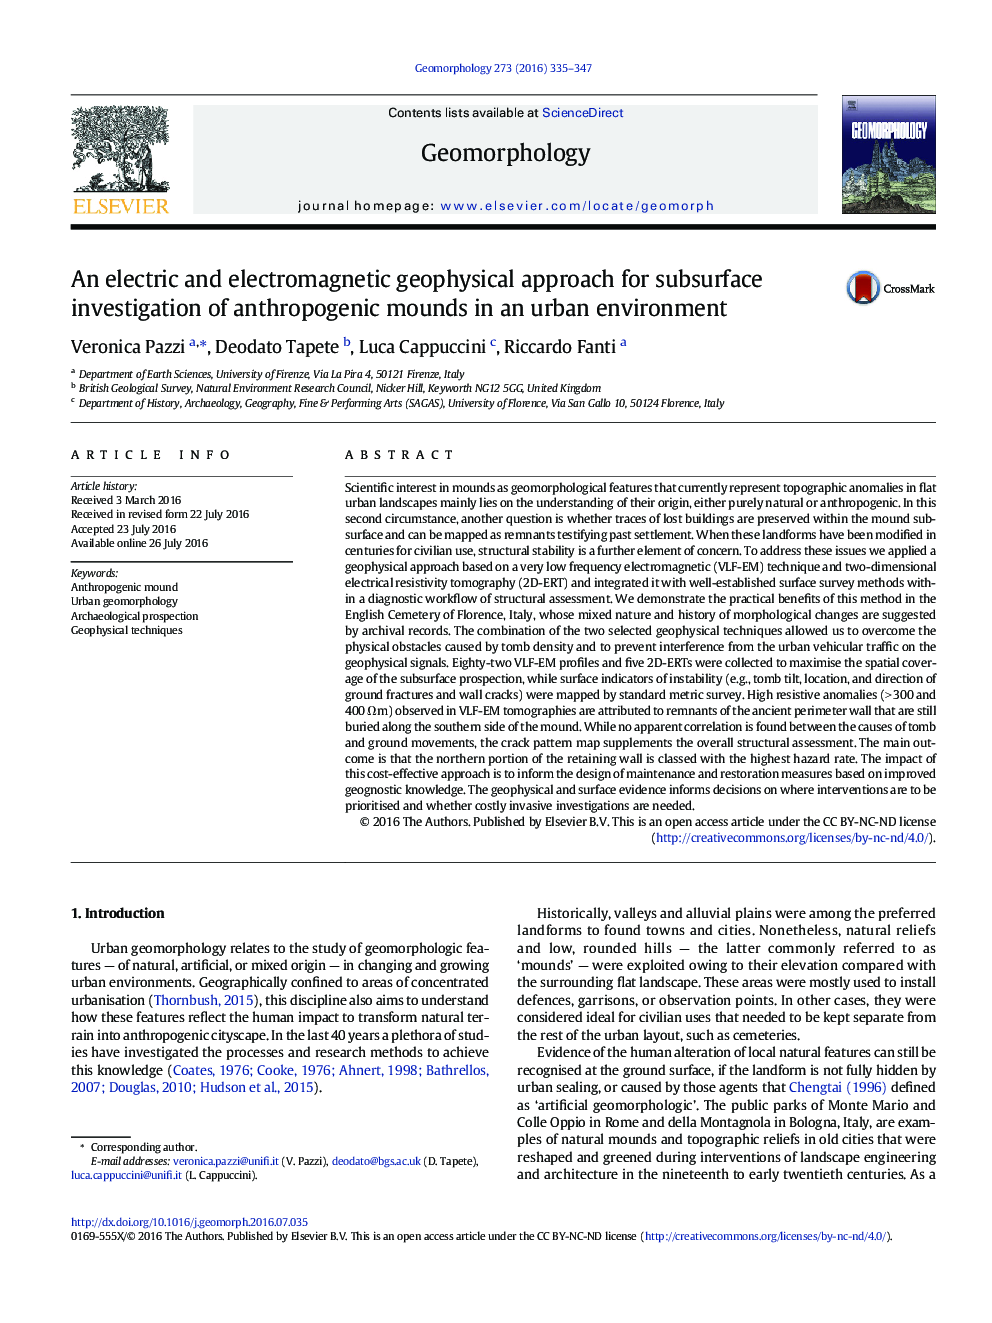 An electric and electromagnetic geophysical approach for subsurface investigation of anthropogenic mounds in an urban environment